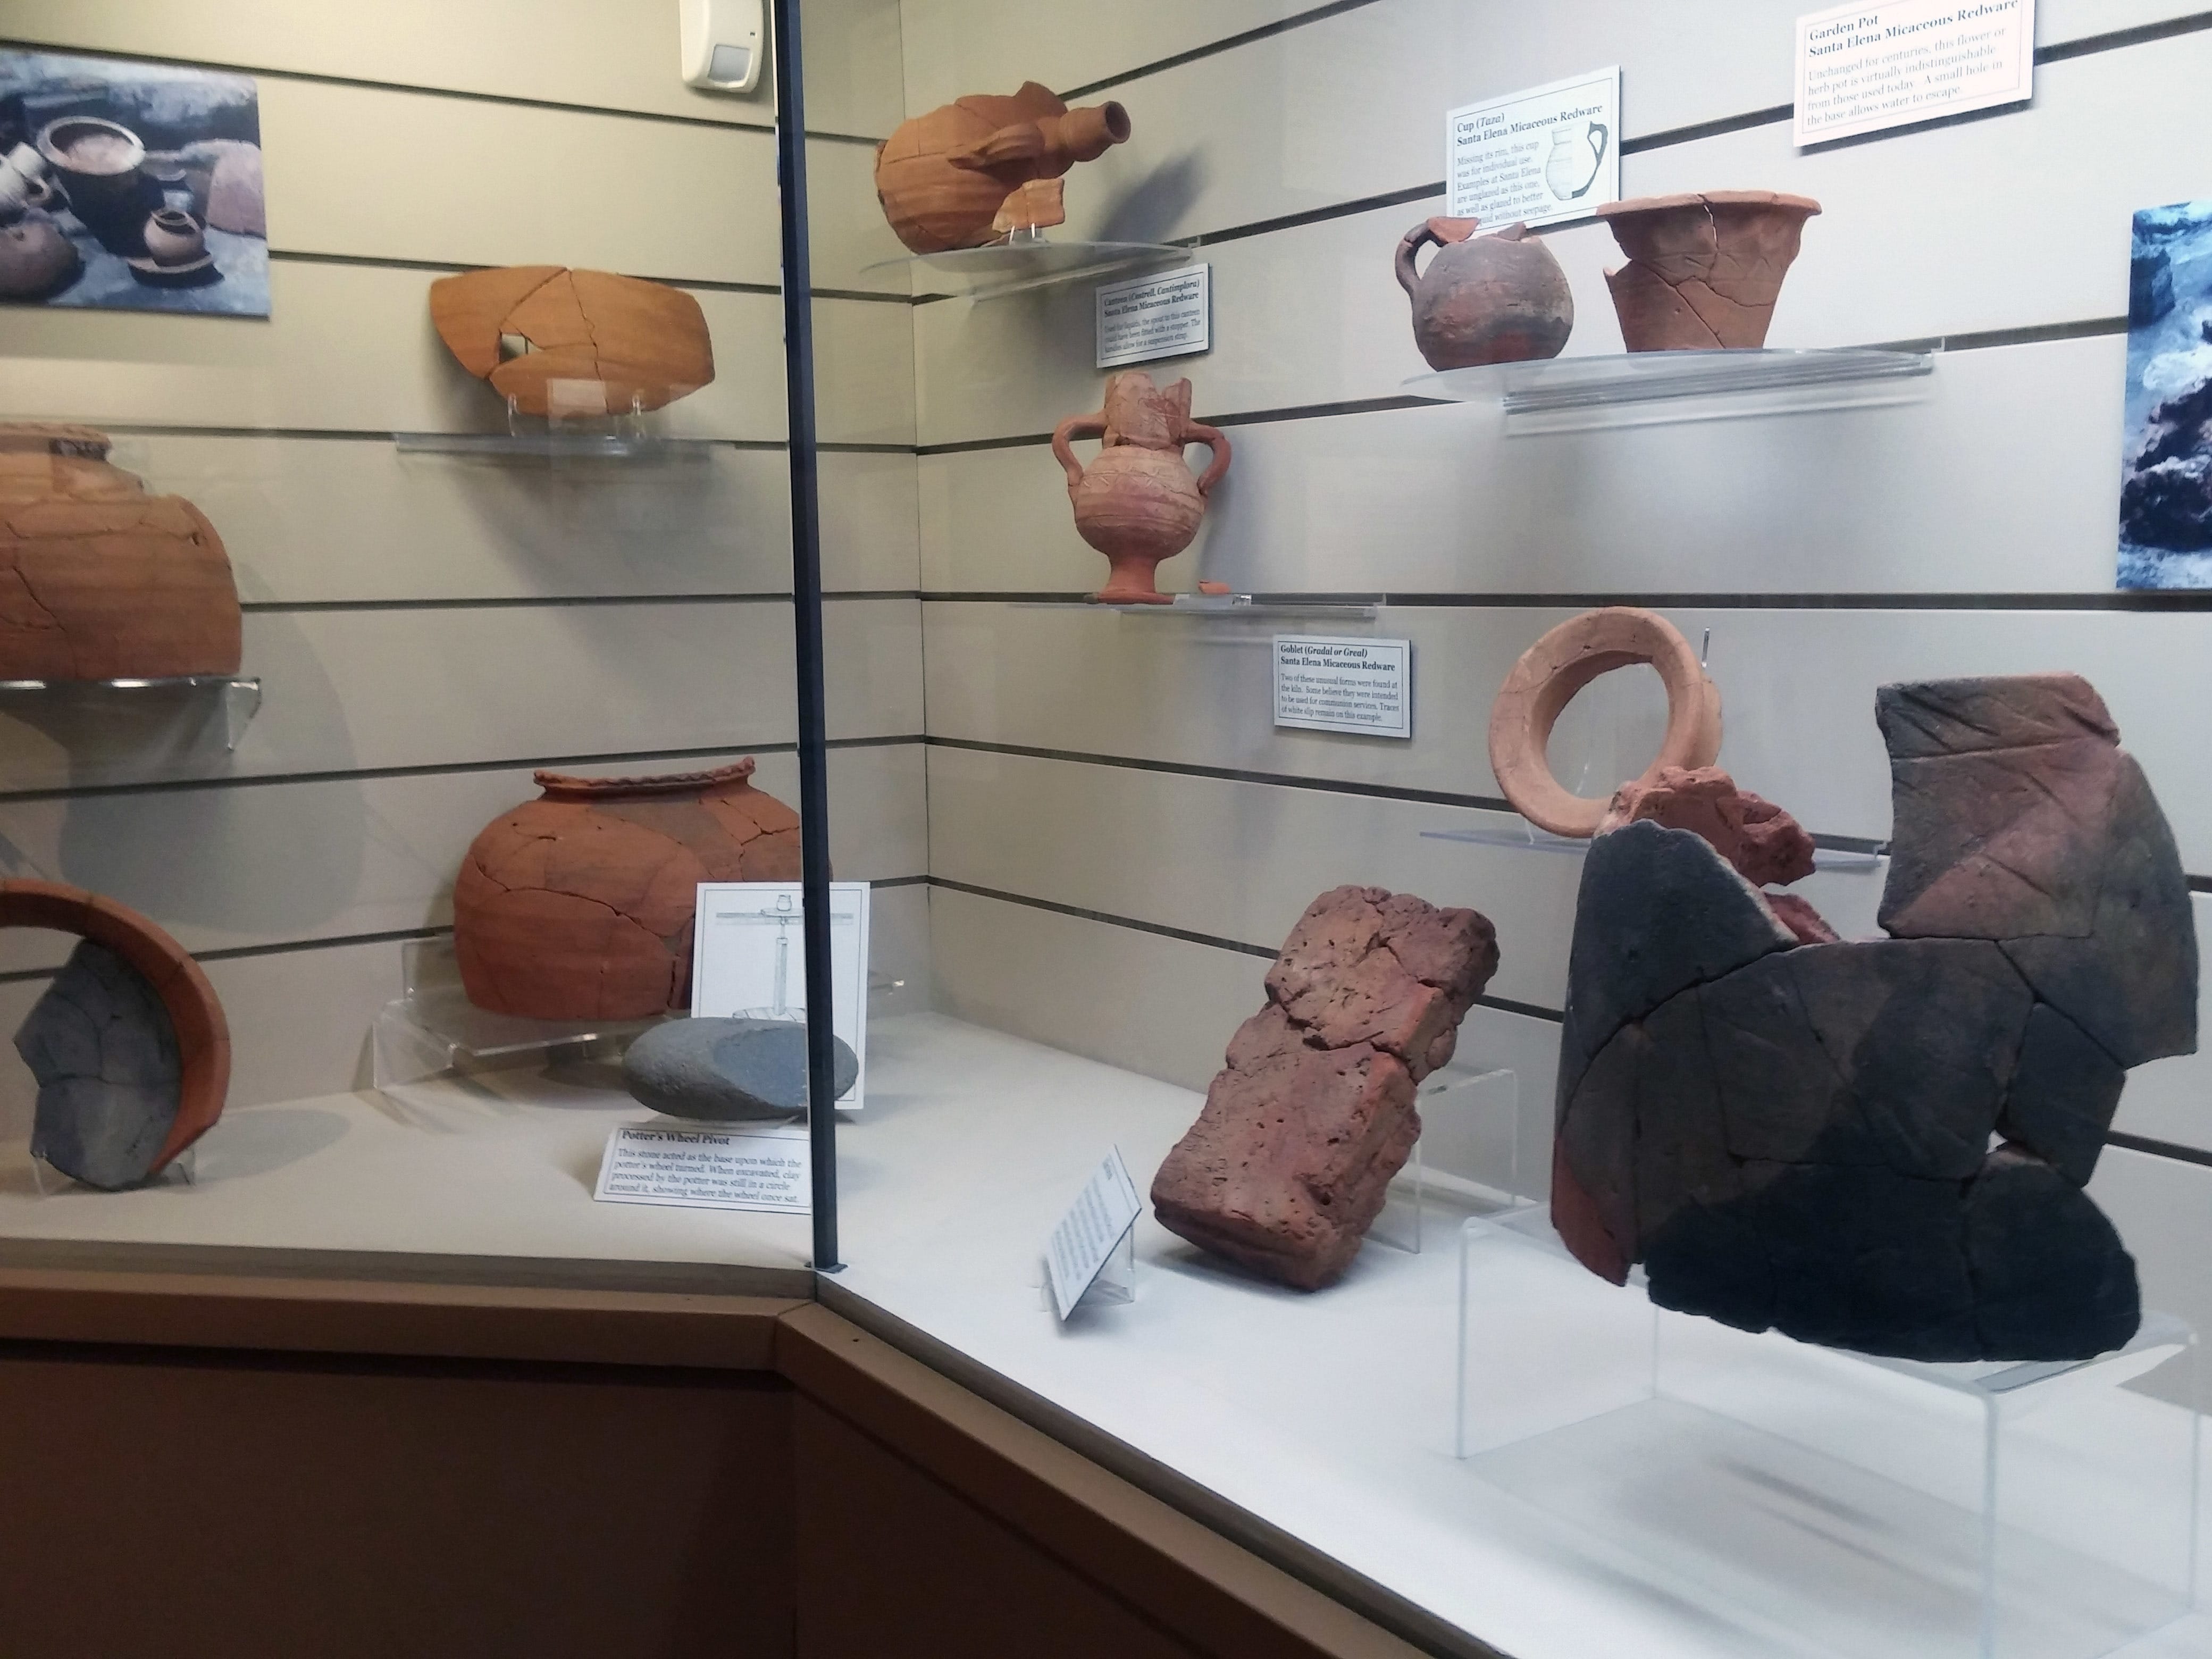 In this undated photo, pottery and other artifacts from the 450-year-old Spanish settlement of Santa Elena are on display at the Parris Island Museum in Parris Island, S.C. Archaeologists have found the location of a the San Marcos Fort, one of five forts that operated during the 21-year history of the early Spanish settlement of Santa Elena on Parris Island.